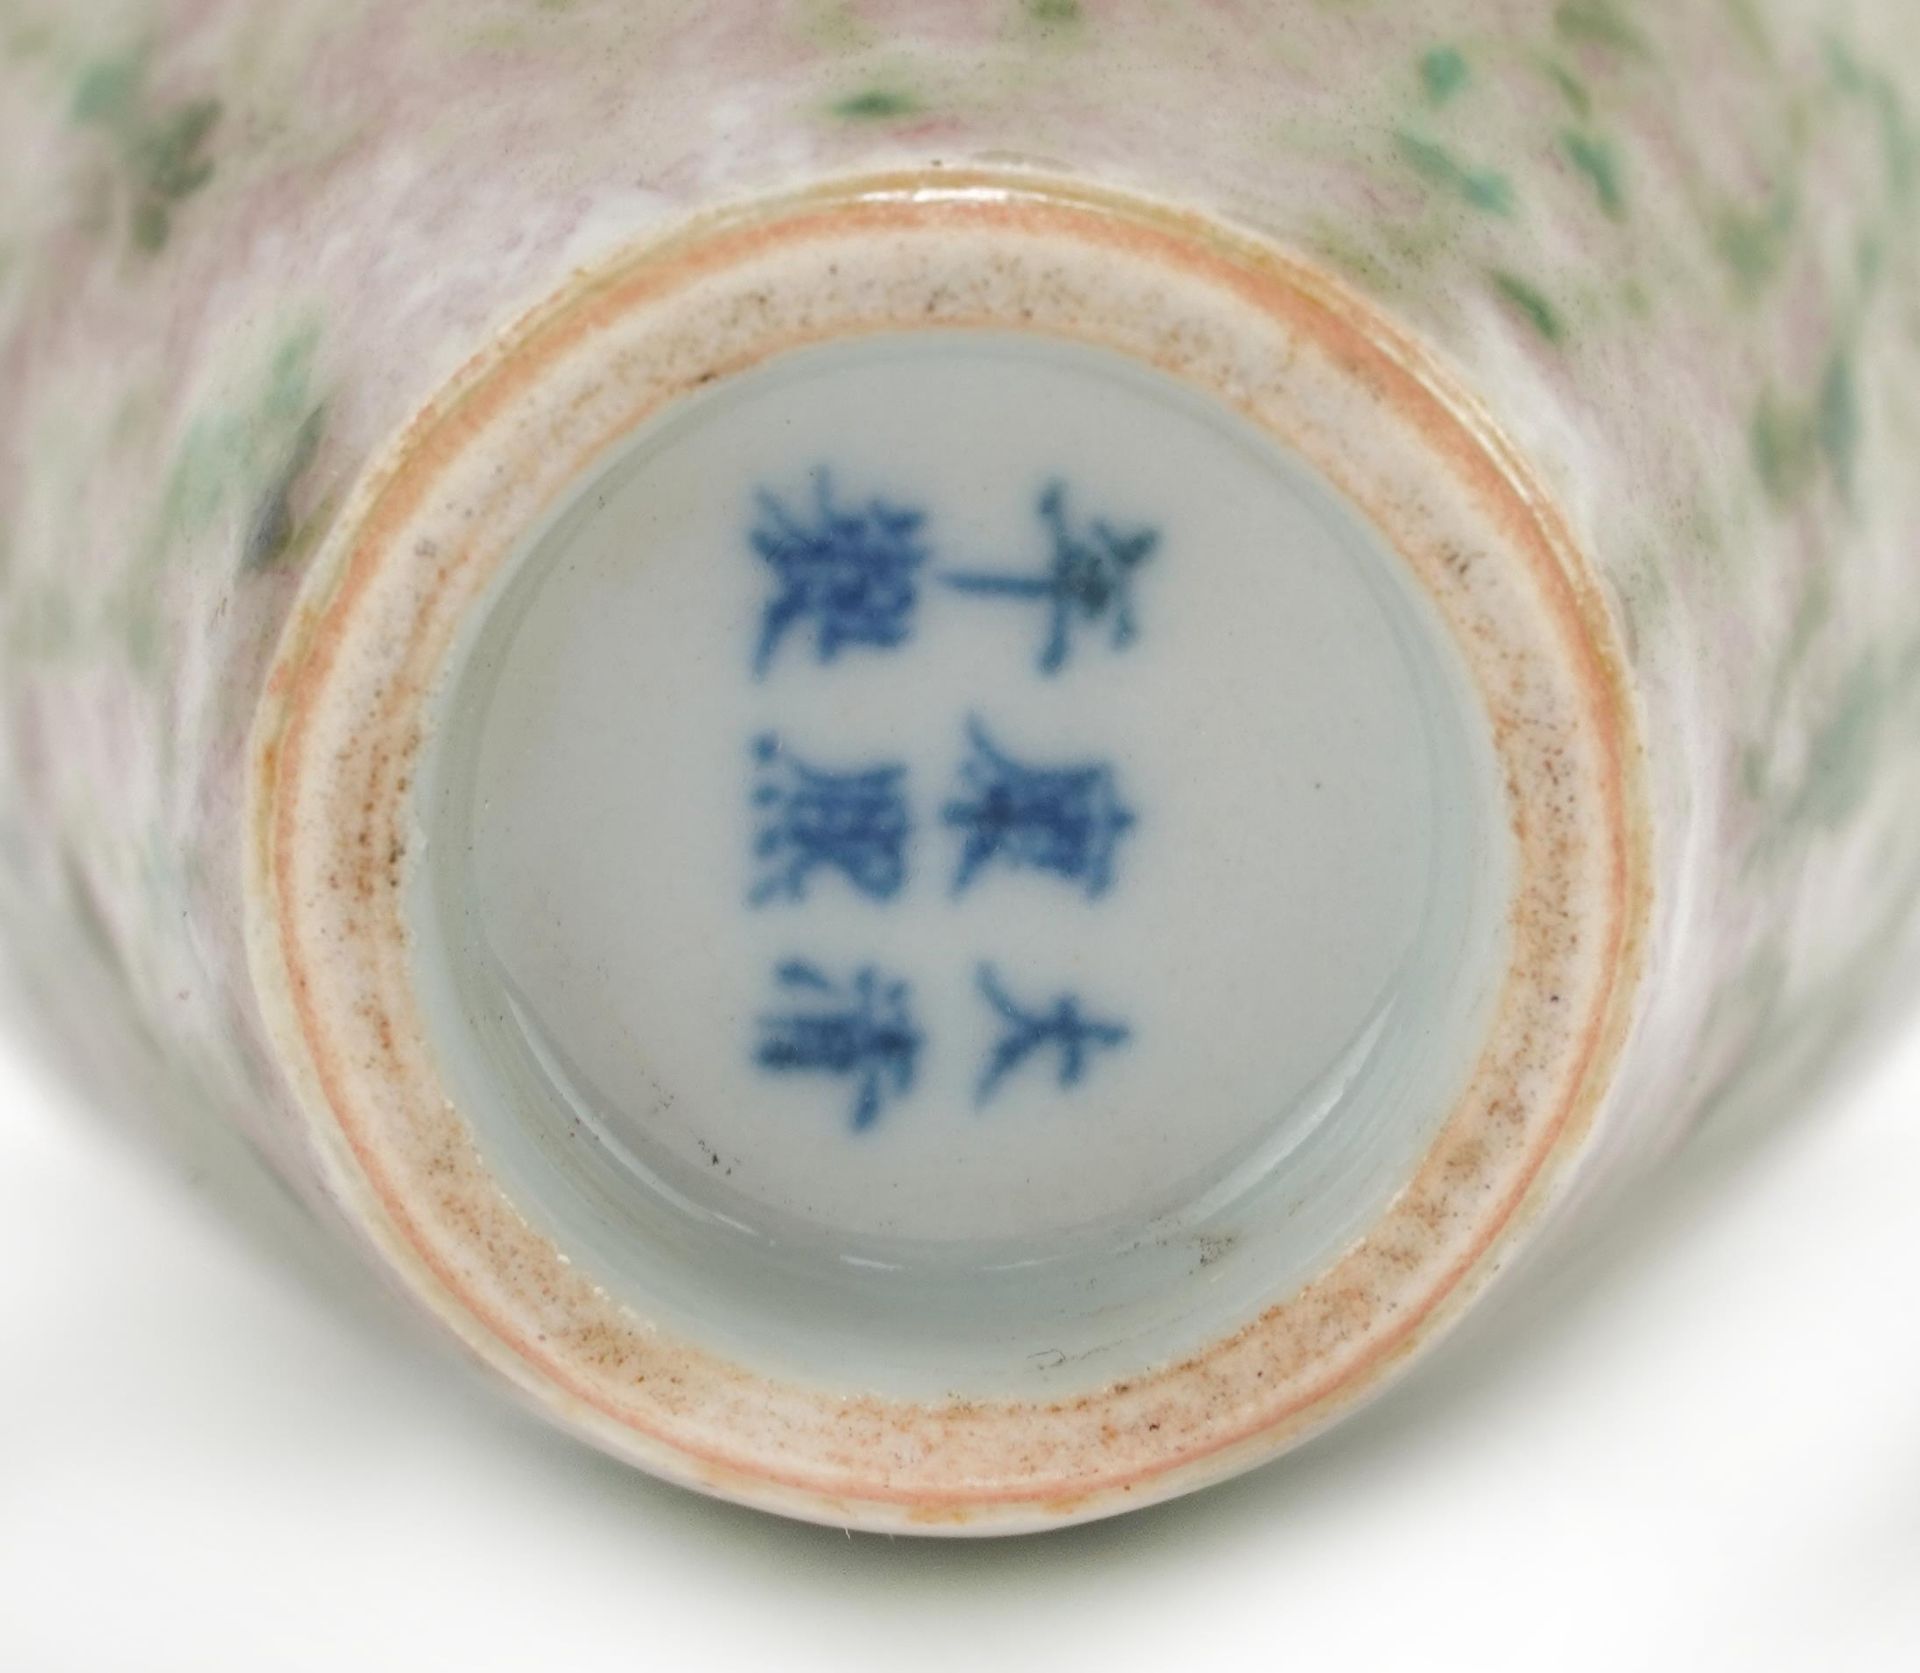 Chinese porcelain vase having a spotted green and red glaze, six figure character marks to the base - Image 7 of 8